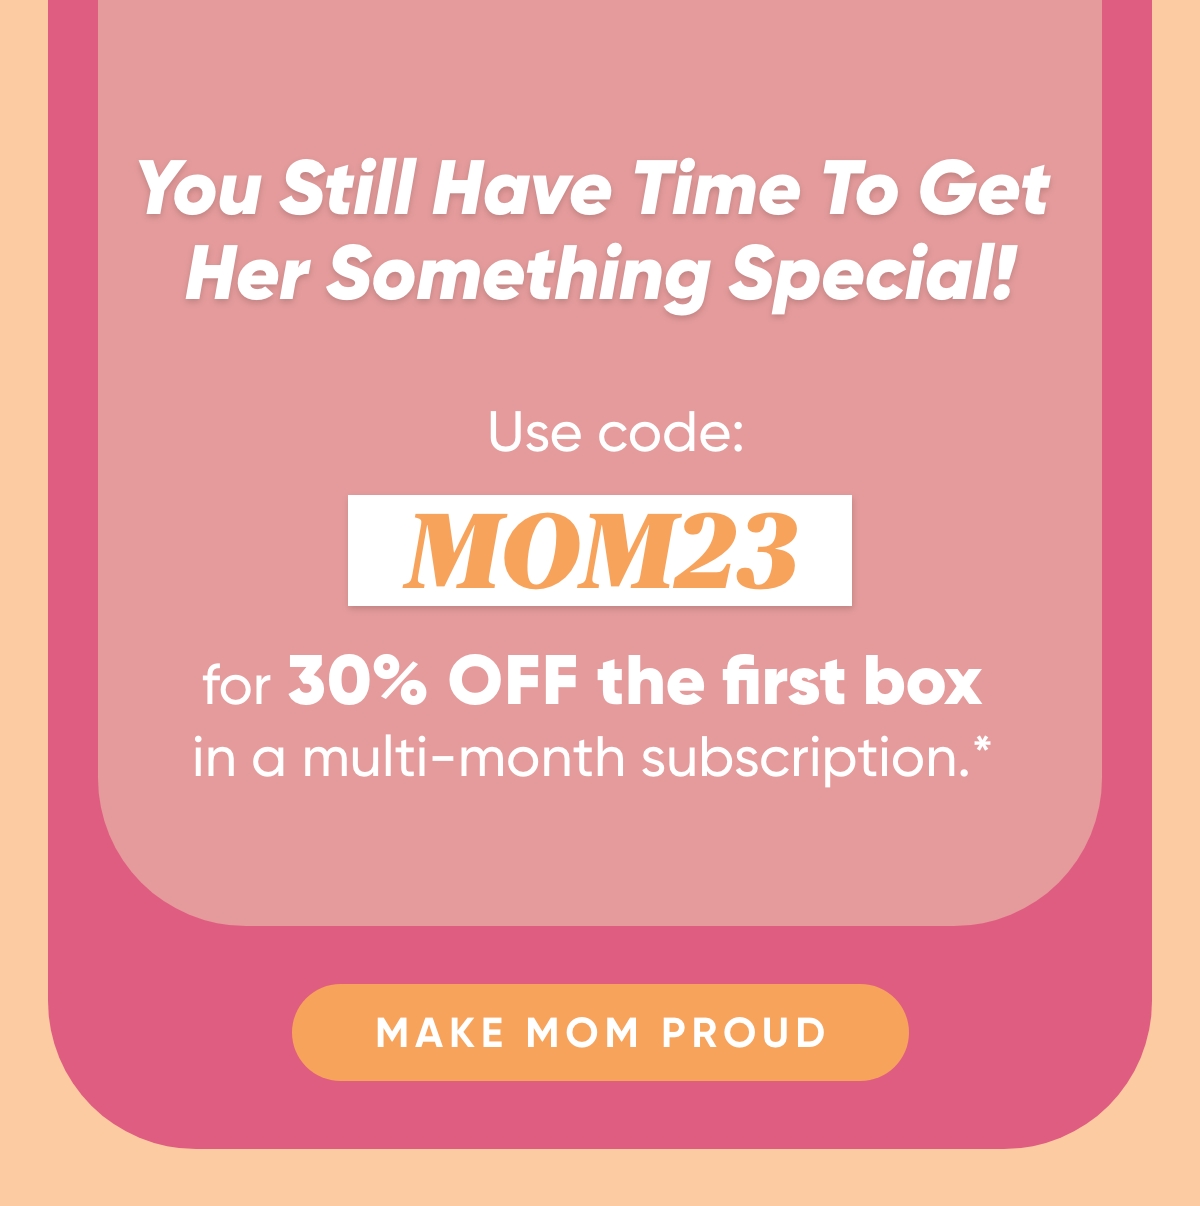 You Still Have Time To Get Her Something Special!   Use code: MOM23 for 30% off the first box in a multi-month subscription*   Make Mom Proud